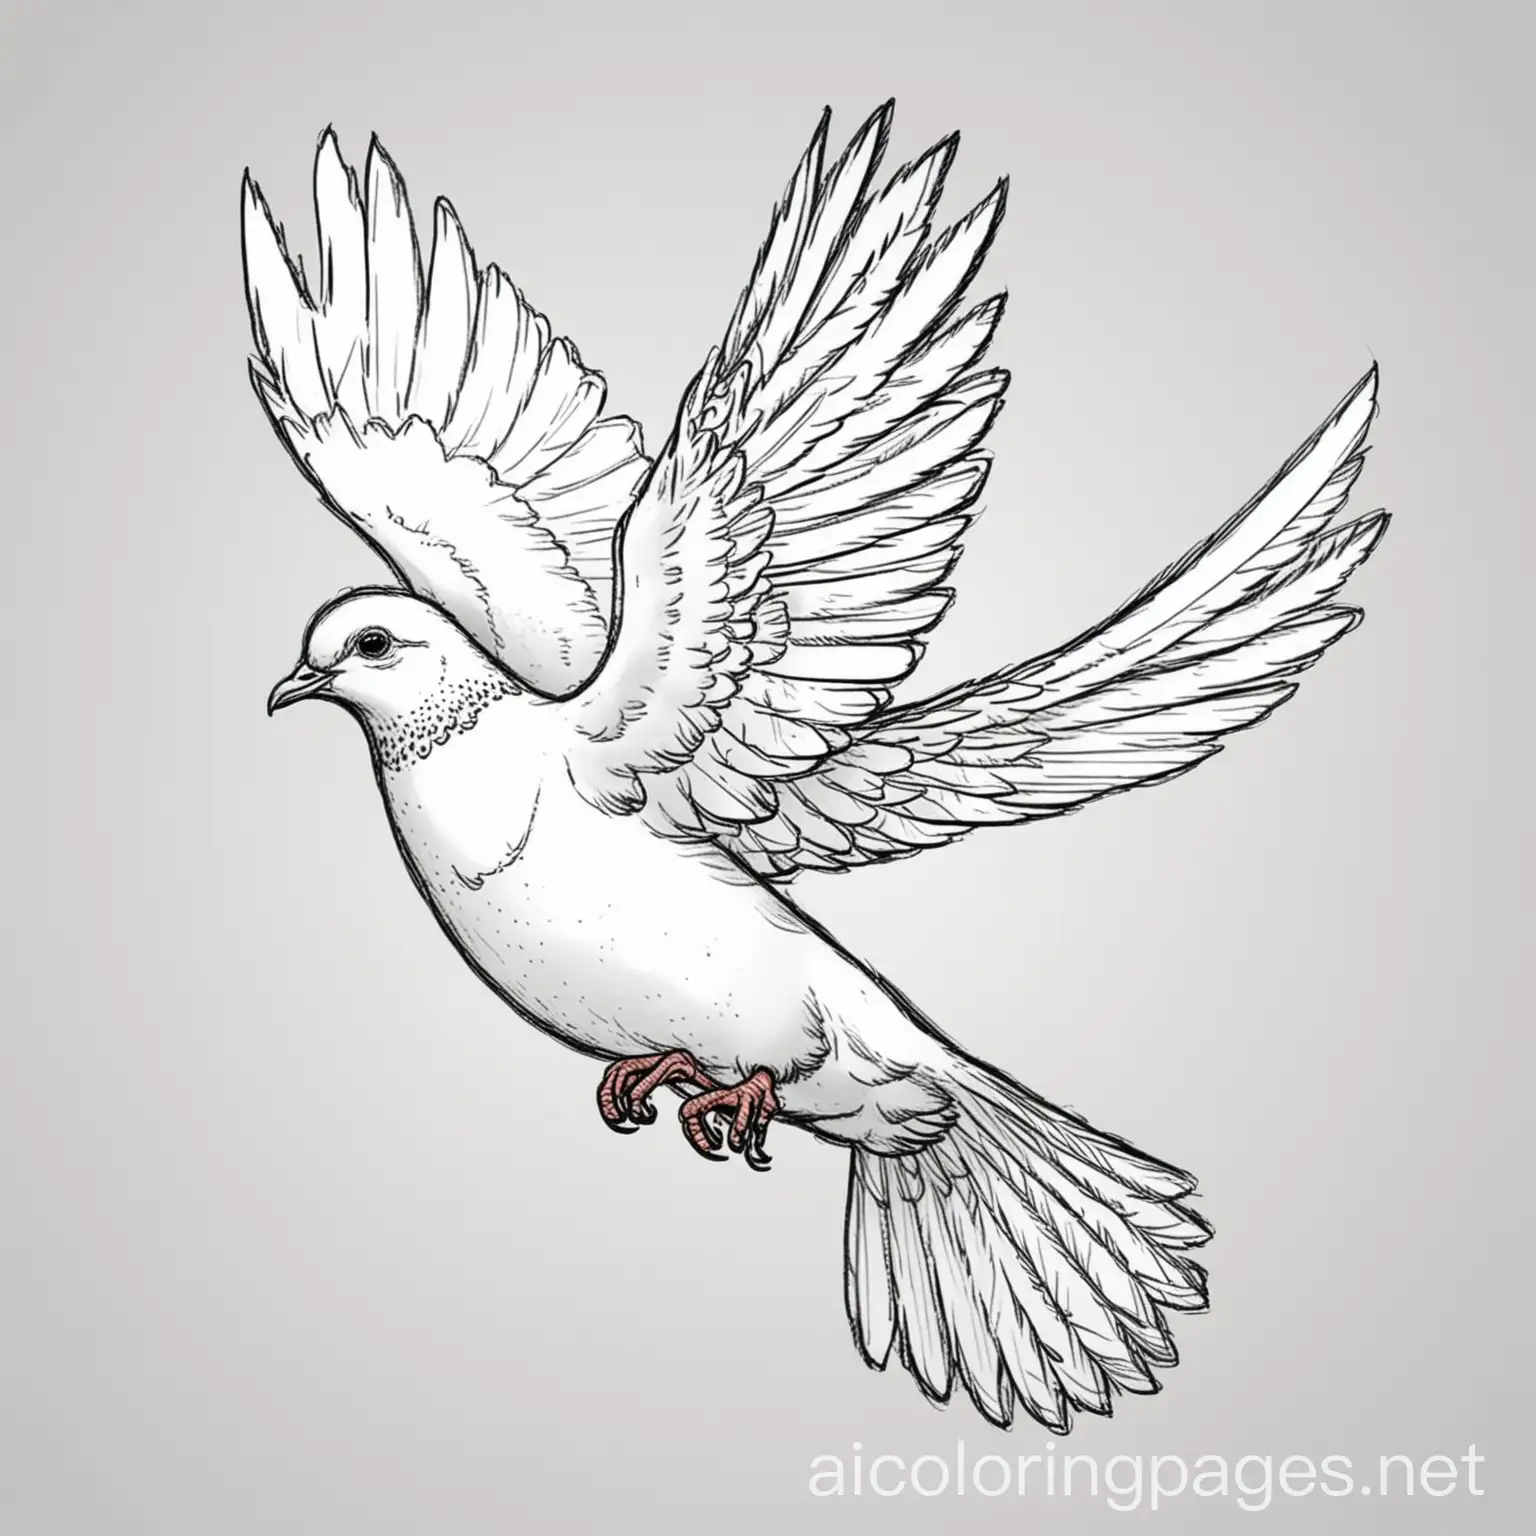 coloring book pigeons flying and pooping , Coloring Page, black and white, line art, white background, Simplicity, Ample White Space